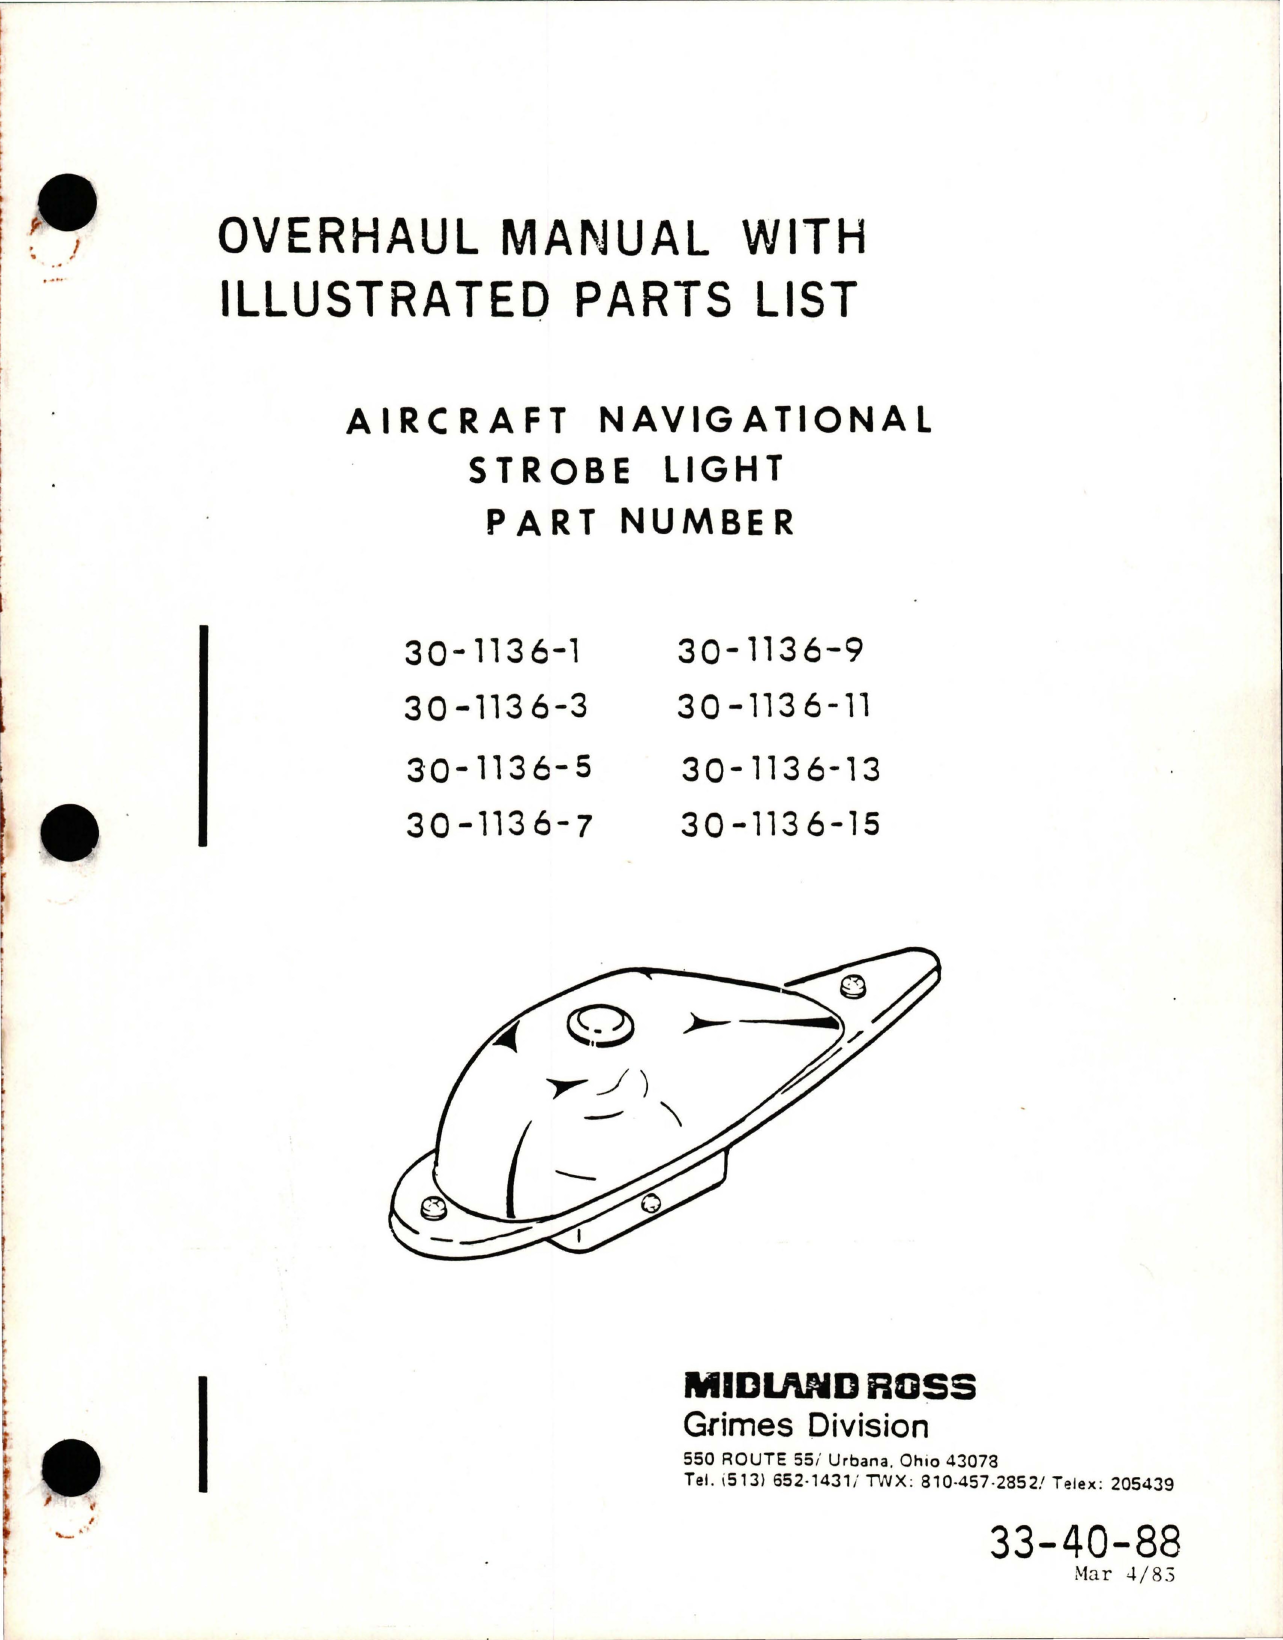 Sample page 1 from AirCorps Library document: Overhaul Manual with Illustrated Parts List for Navigational Strobe Light